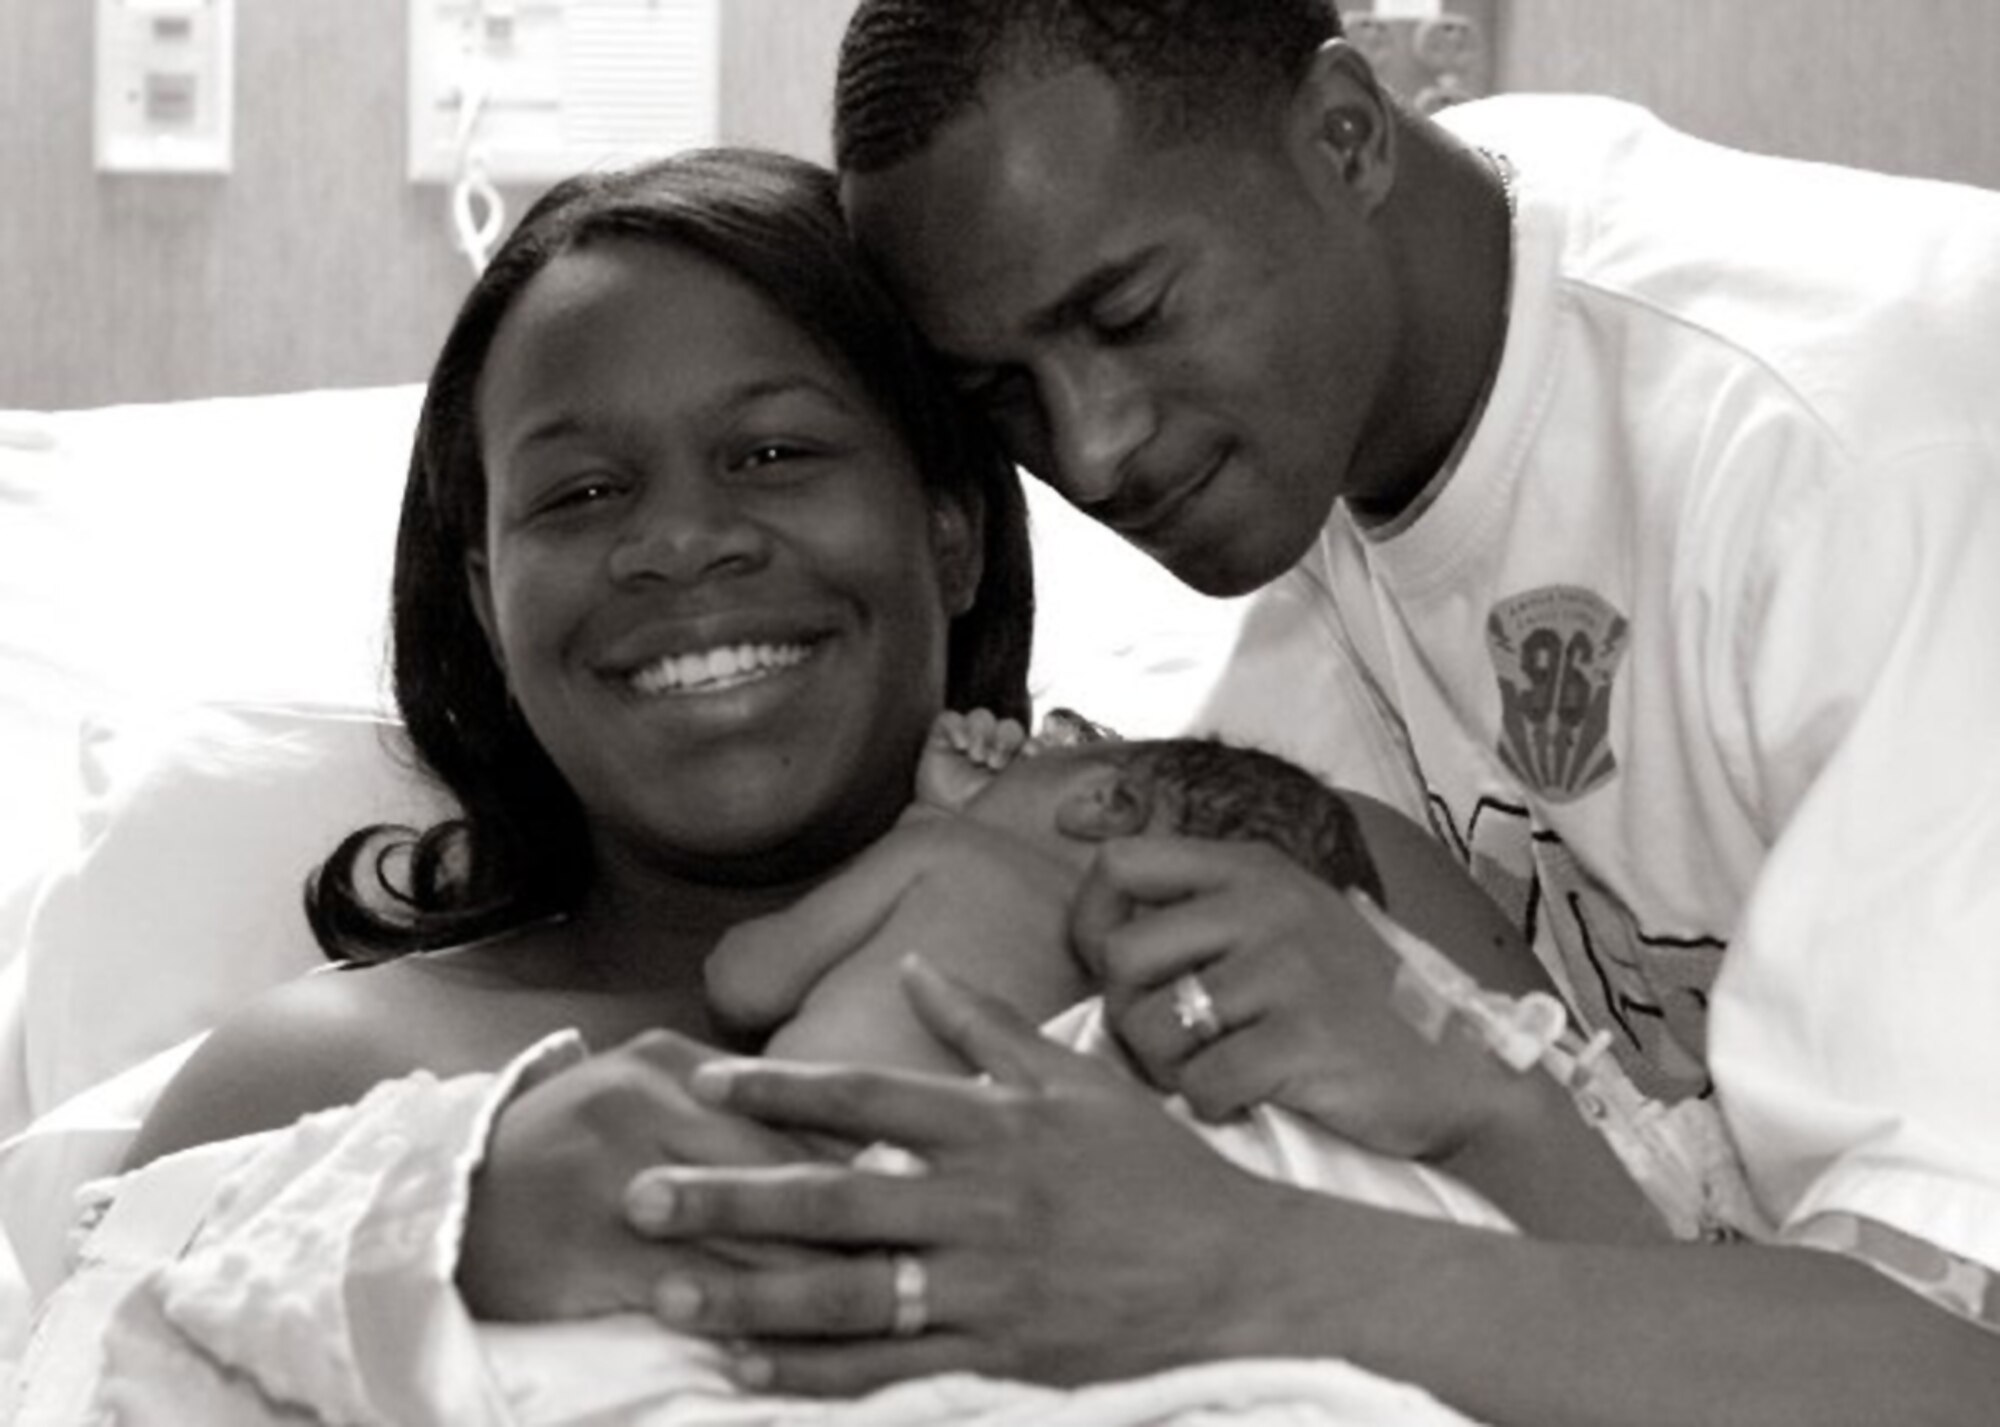 The 552nd Air Control Wing’s Staff Sgt. Van Stewart and his wife, Stephanie, made the decision to carry to term their son Vayden after he had been diagnosed with a terminal condition in the 22nd week of her pregnancy. After Vayden died, the Stewarts used the experience they went through during their loss, to start an organization that helps other mothers across the country who have made the decision to carry a child to term after a terminal diagnosis has been made. Both of the Stewarts say the three hours Vayden was alive, were some of the best of their lives. (Courtesy photo)